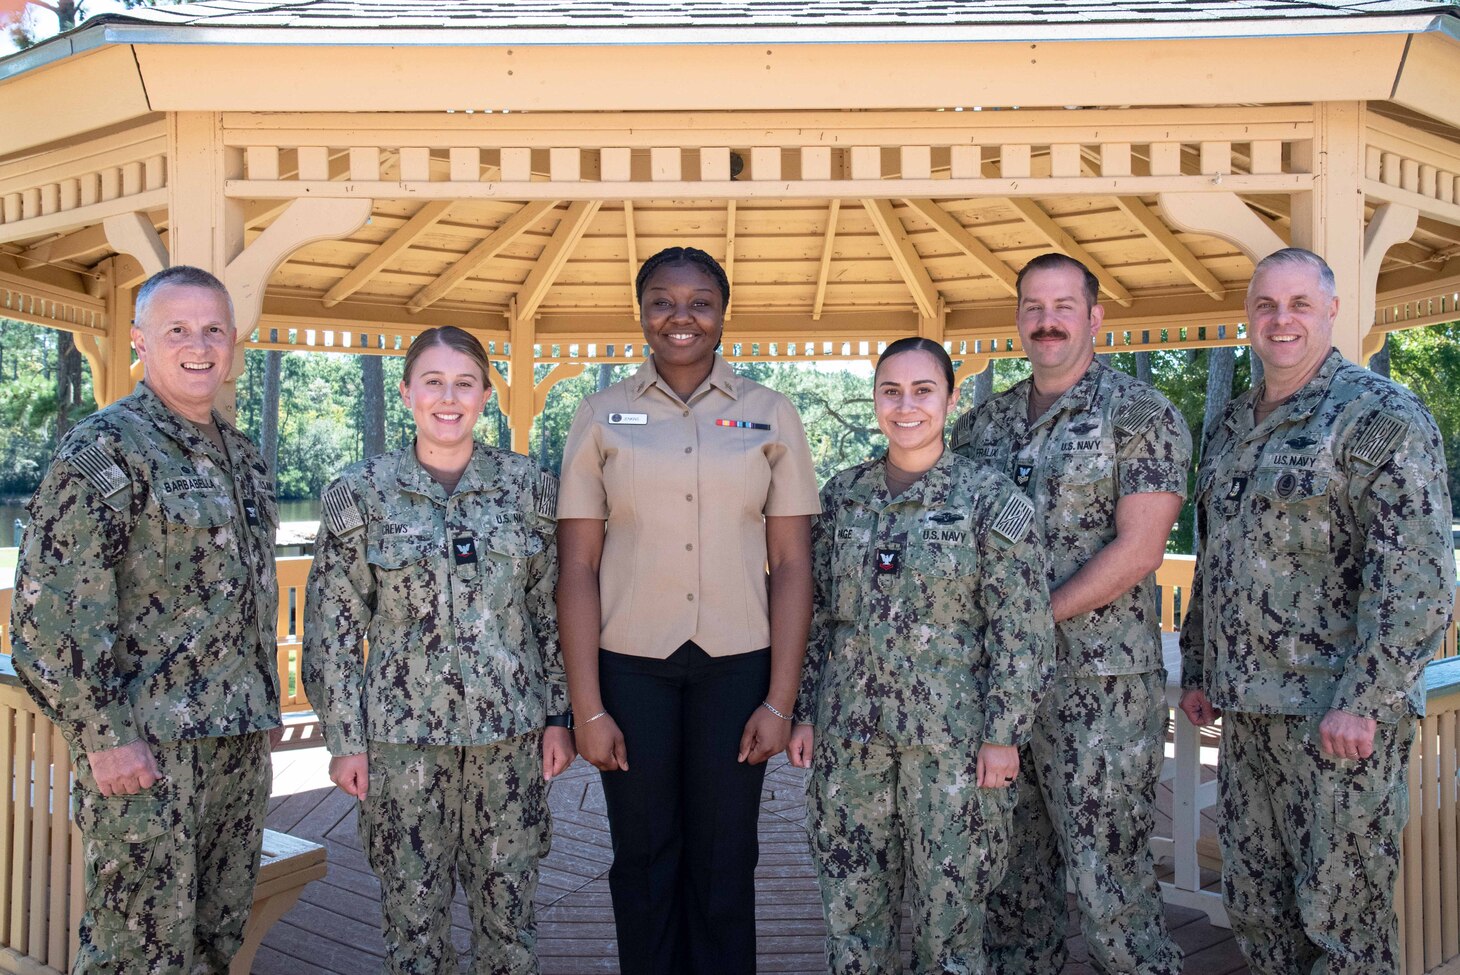 Capt. Sean Barbabella, left, Commander of Naval Health Clinic Cherry Point and Senior Chief Petty Officer Michael Corapi, the Senior Enlisted Advisor aboard Naval Health Clinic Cherry Point, stand with Sailors from the clinic recognized with “Of the Year” honors for their diligence and excellence in patient care.  



From left to right, recognized were Hospitalman Third Class Sophia Crews as Junior Sailor of the Year, Hospitalman Meaghan Jenkins as Blue Jacket of the Year, Hospitalman Second Class Emily Page as Sailor of the Year and Hospitalman First Class Garett Fralix as Senior Sailor of the Year.